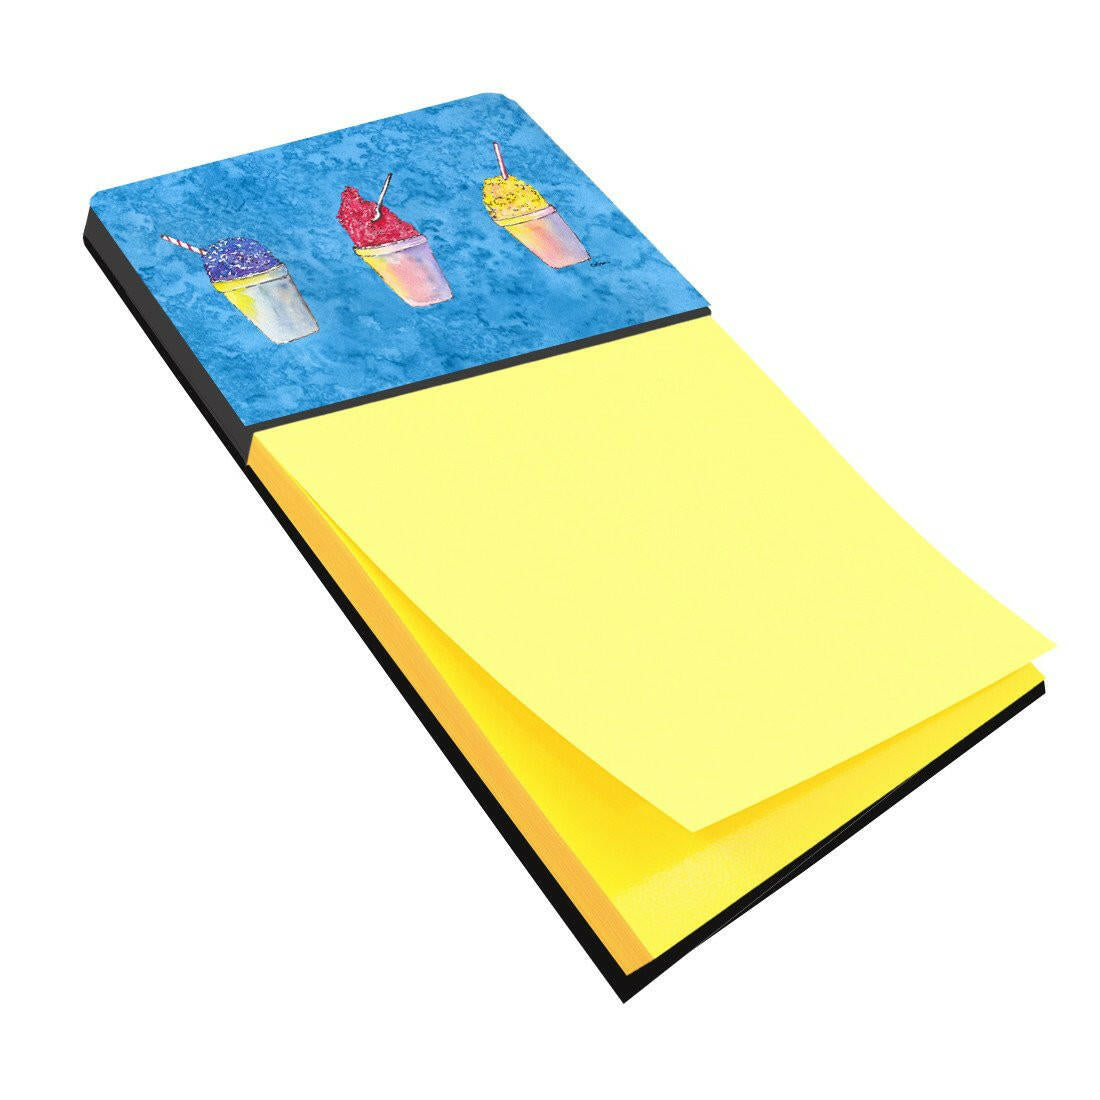 Snowballs and Snowcones Refiillable Sticky Note Holder or Postit Note Dispenser 8780SN by Caroline's Treasures